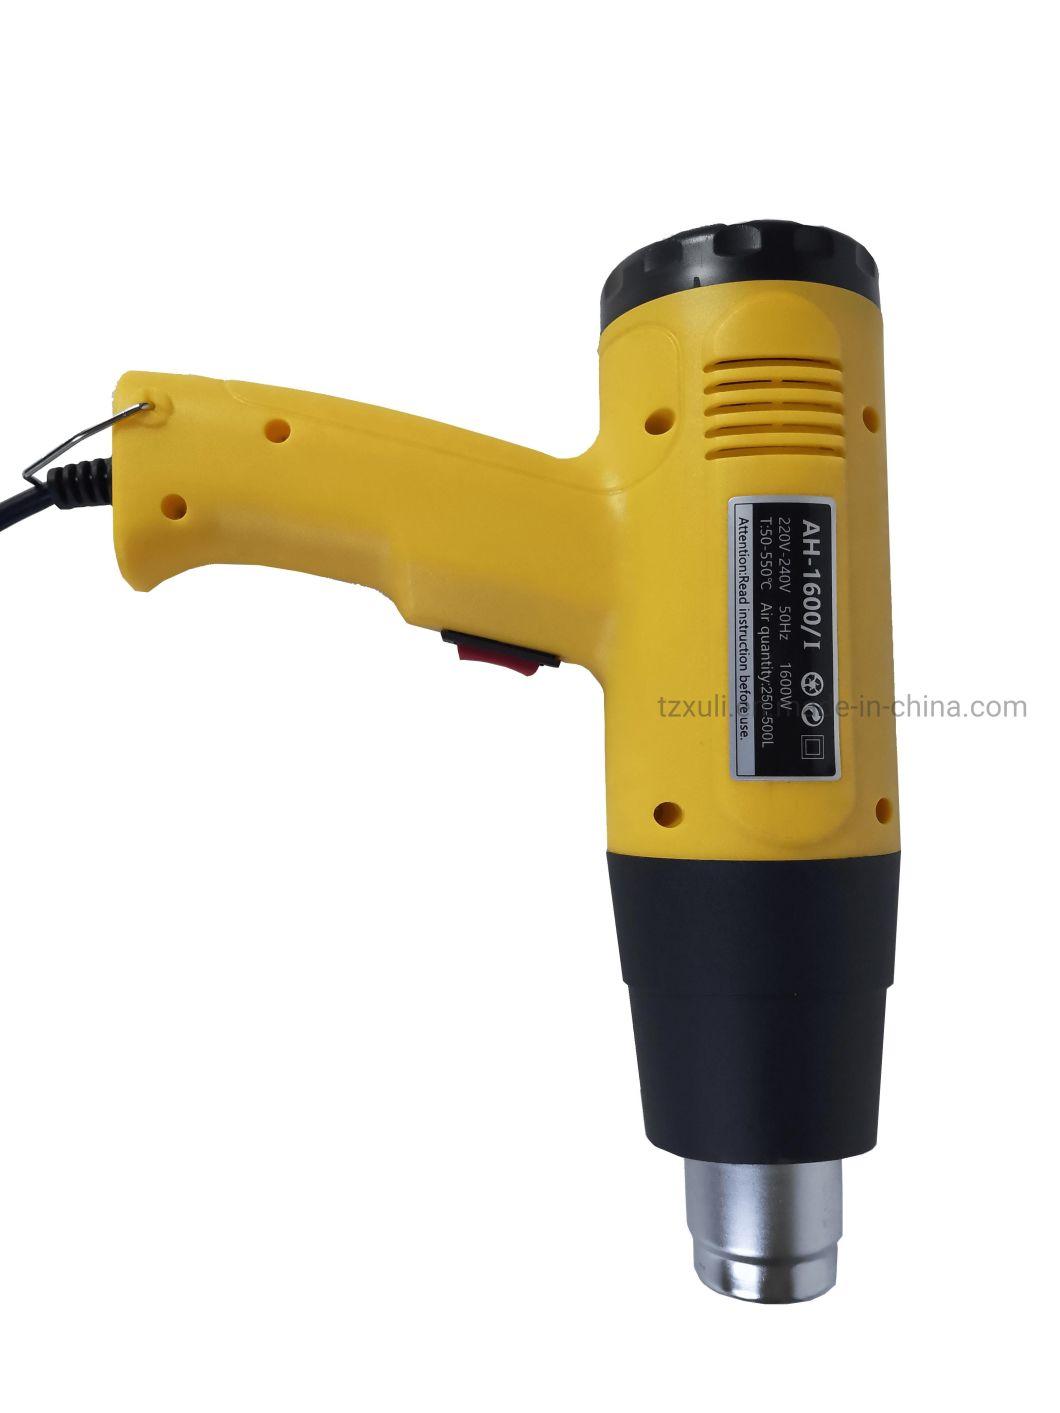 1600W Corded Electric Hot Air Heat Gun for Shrink Wrapping